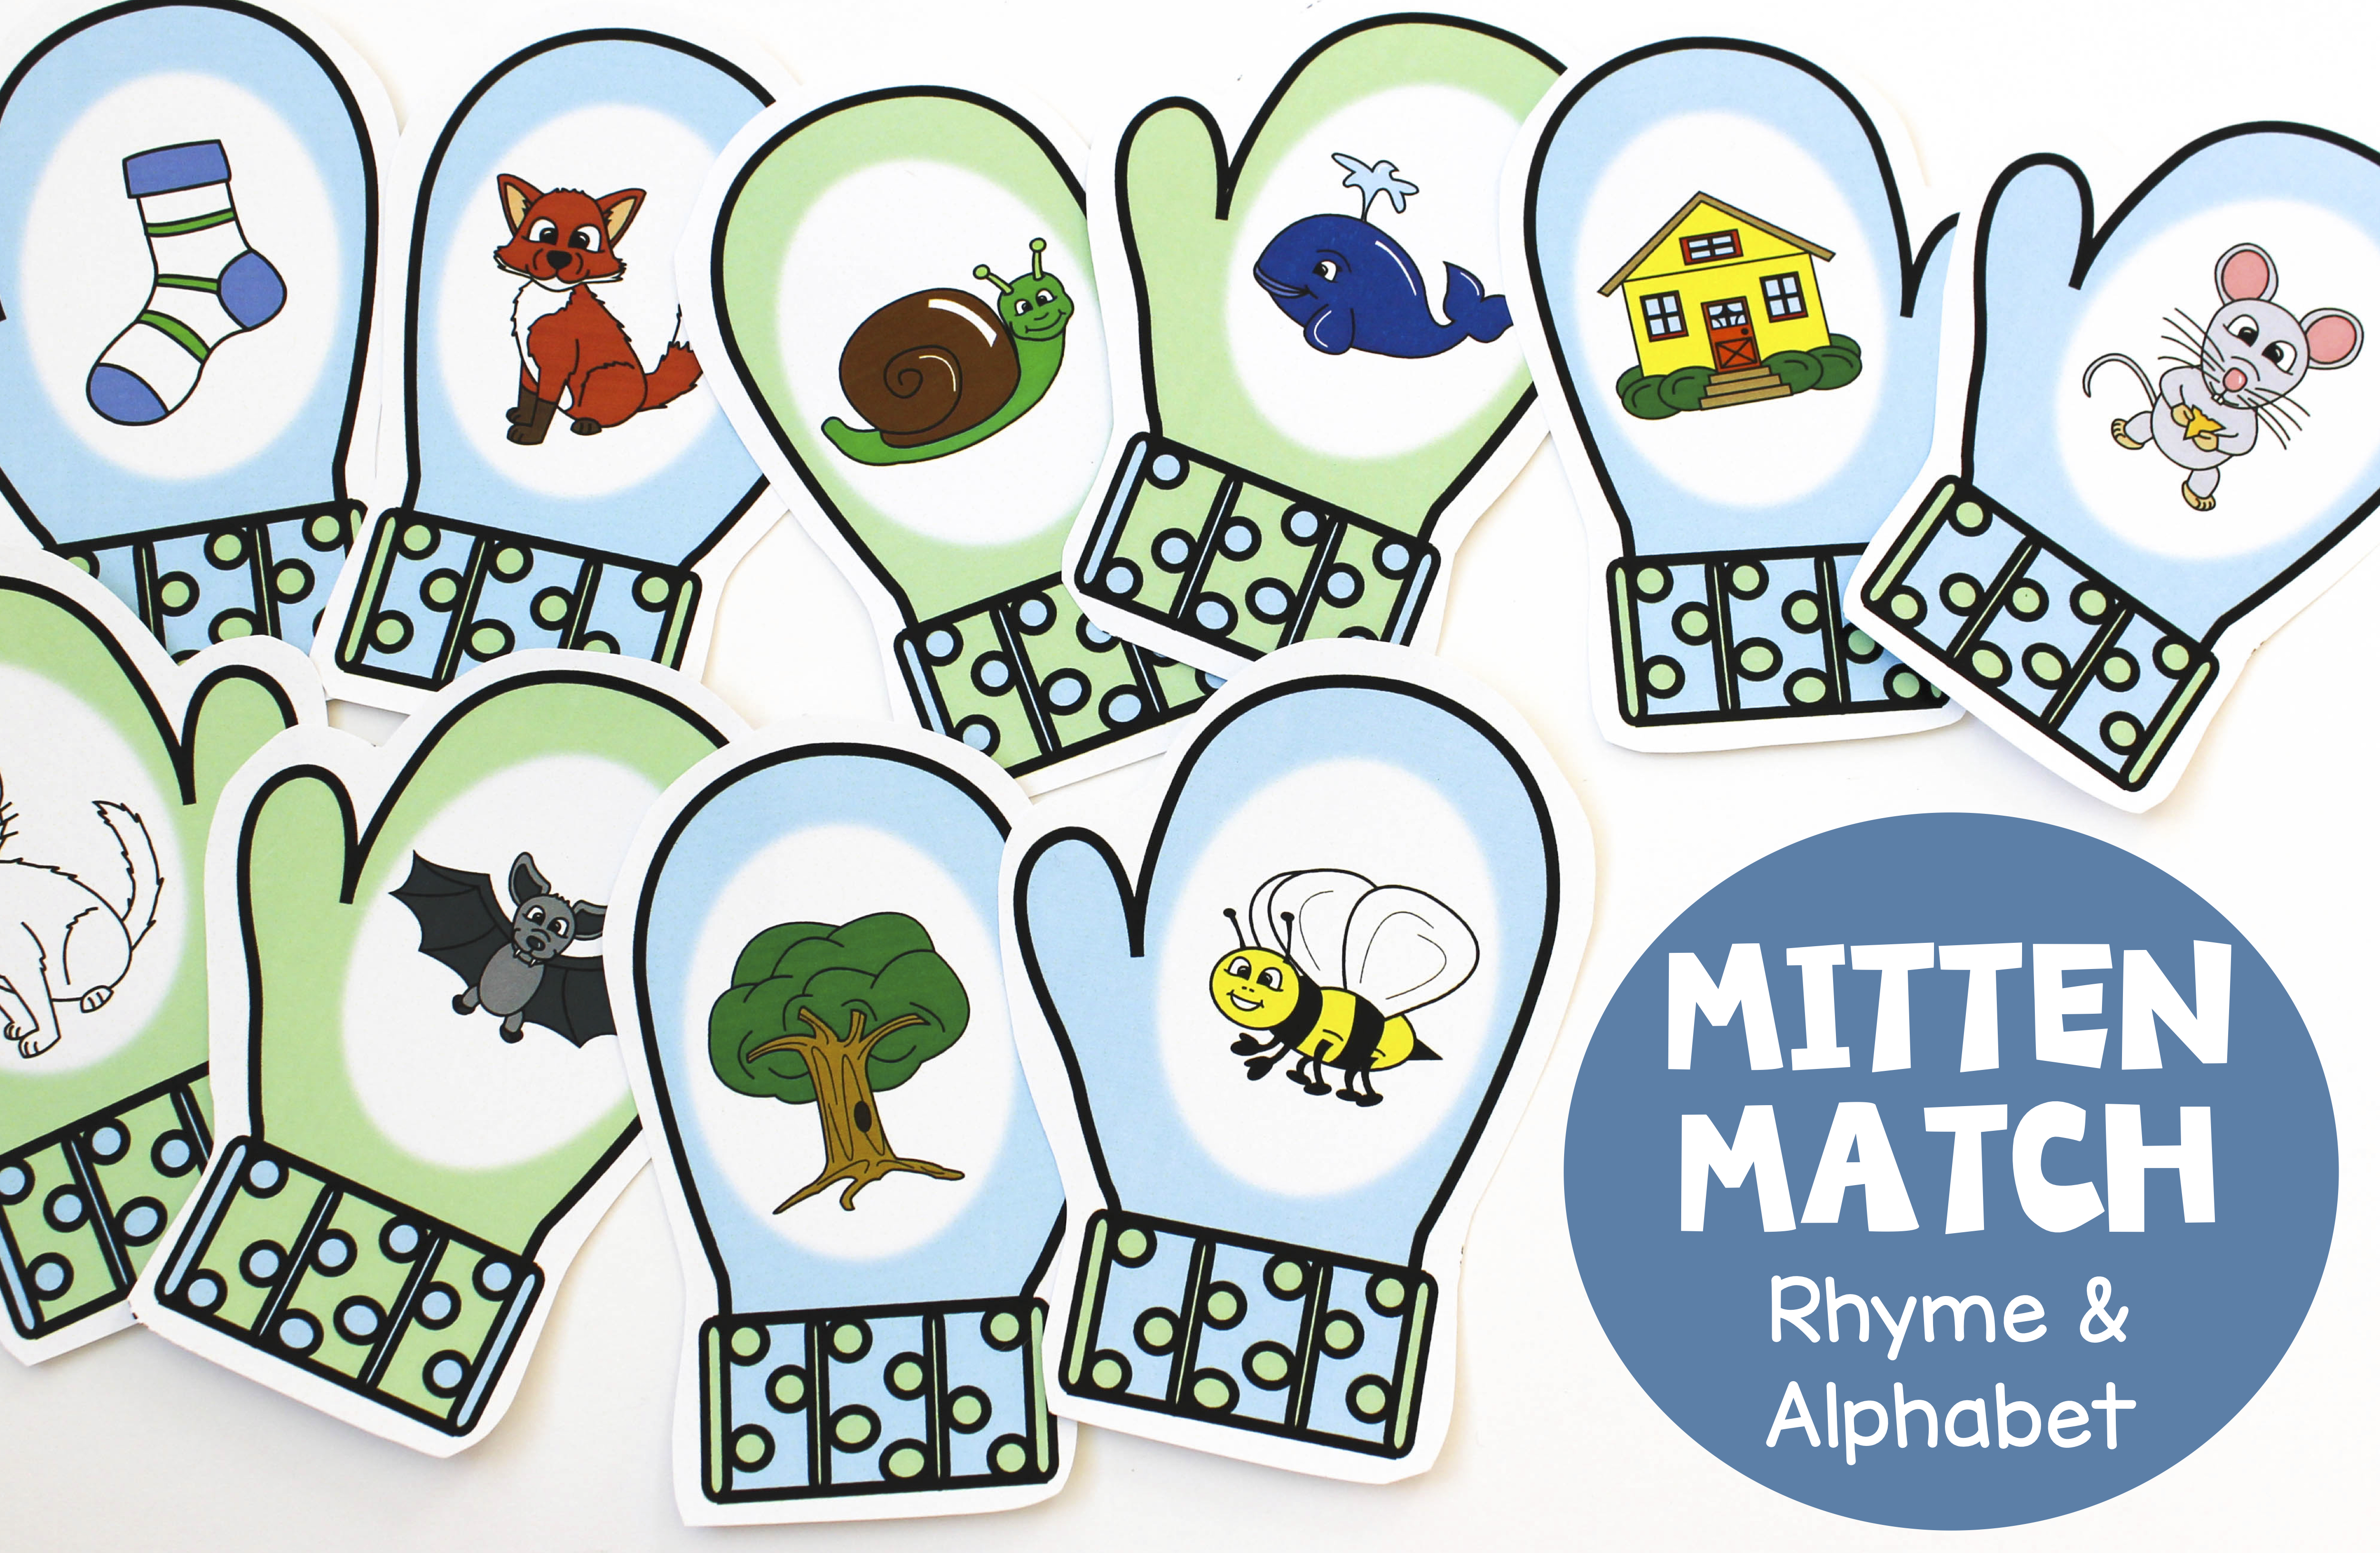 Mitten Match Activities for Rhyme and Letters & Sounds! Make Take & Teach